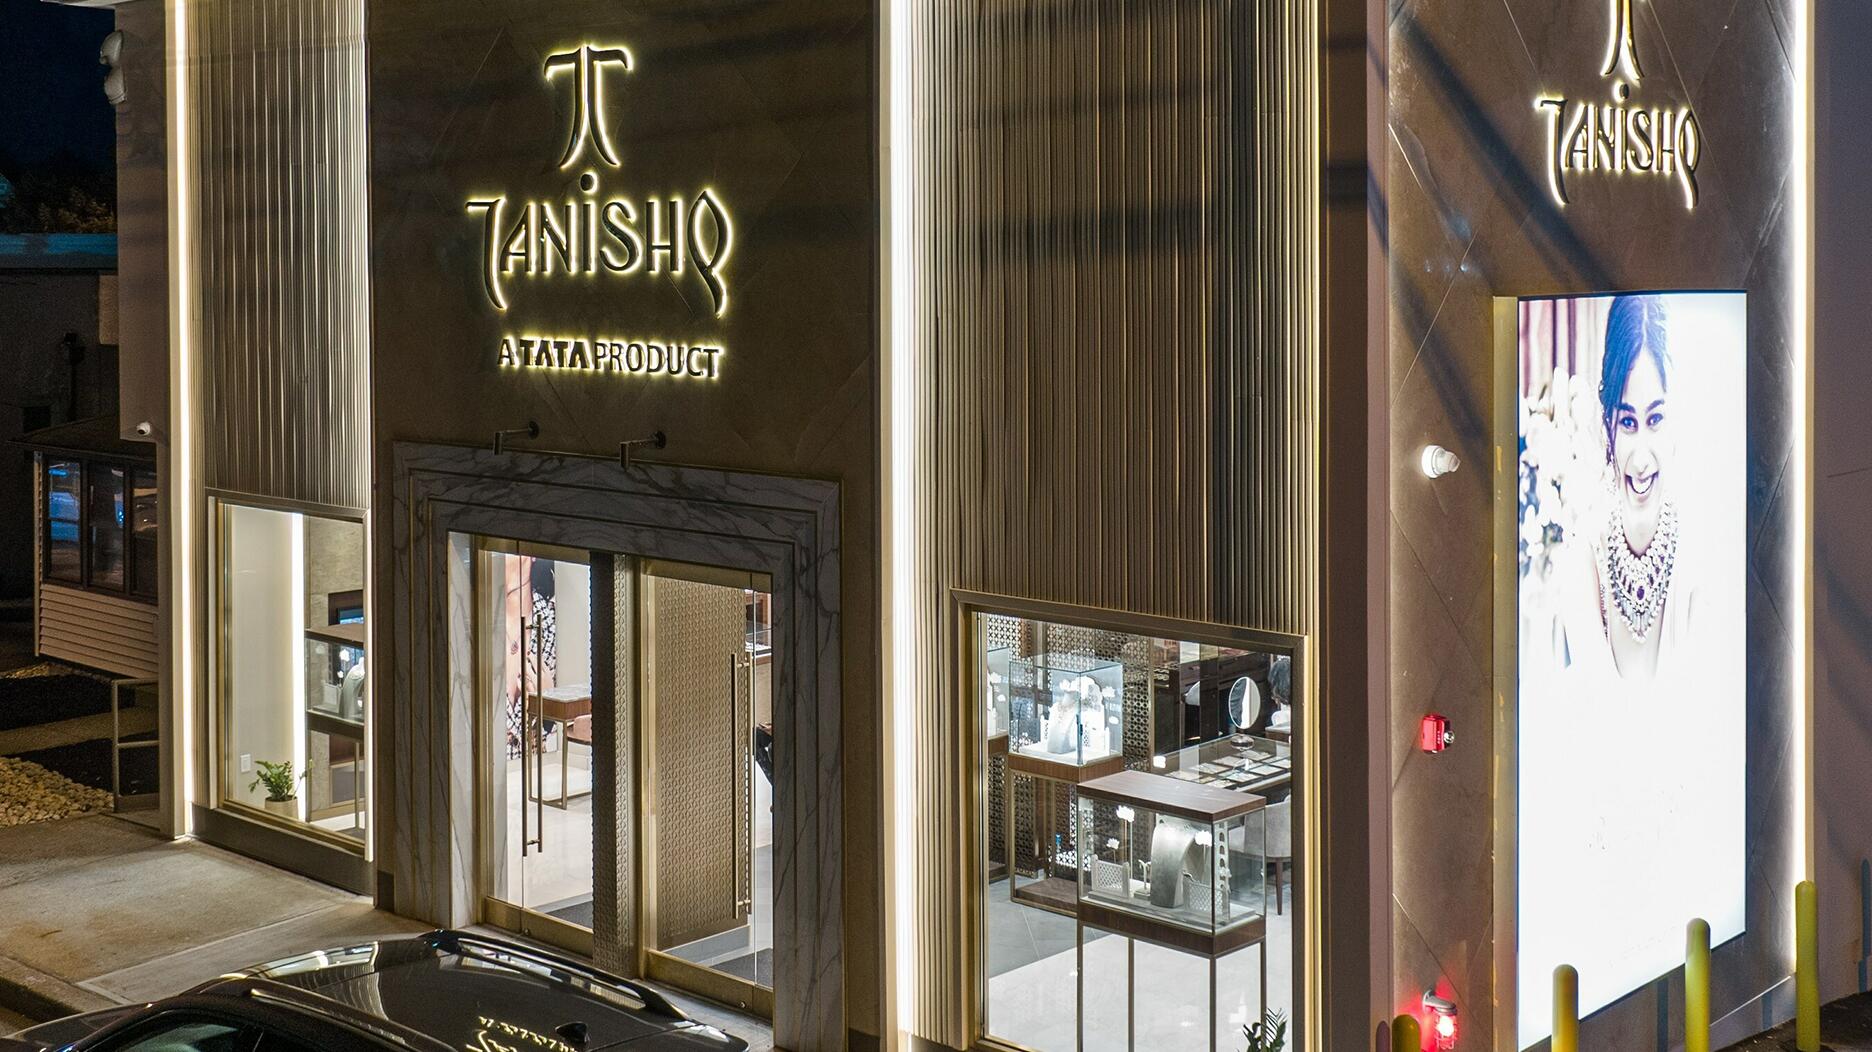 Indian Jewelry Brand Tanishq Opens First U.S. Store, More on the Way